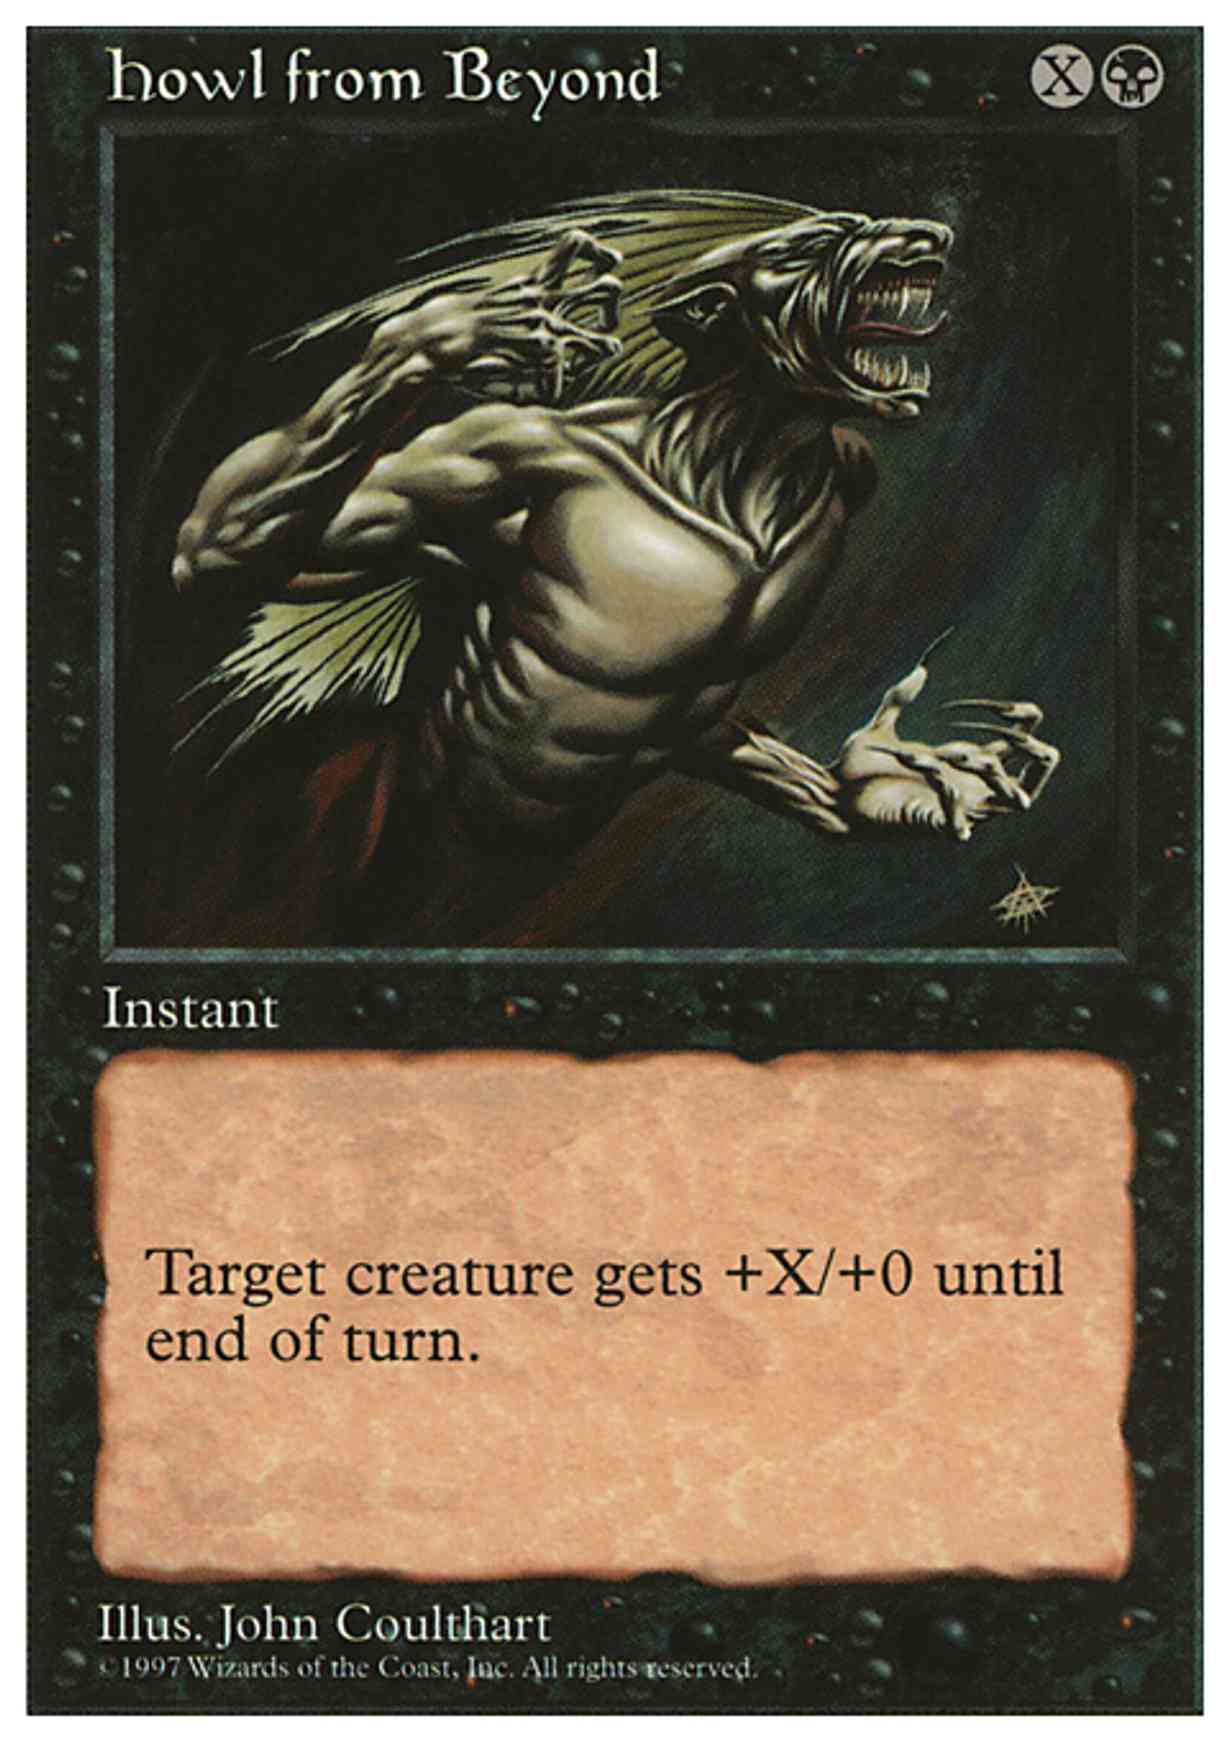 Howl from Beyond magic card front